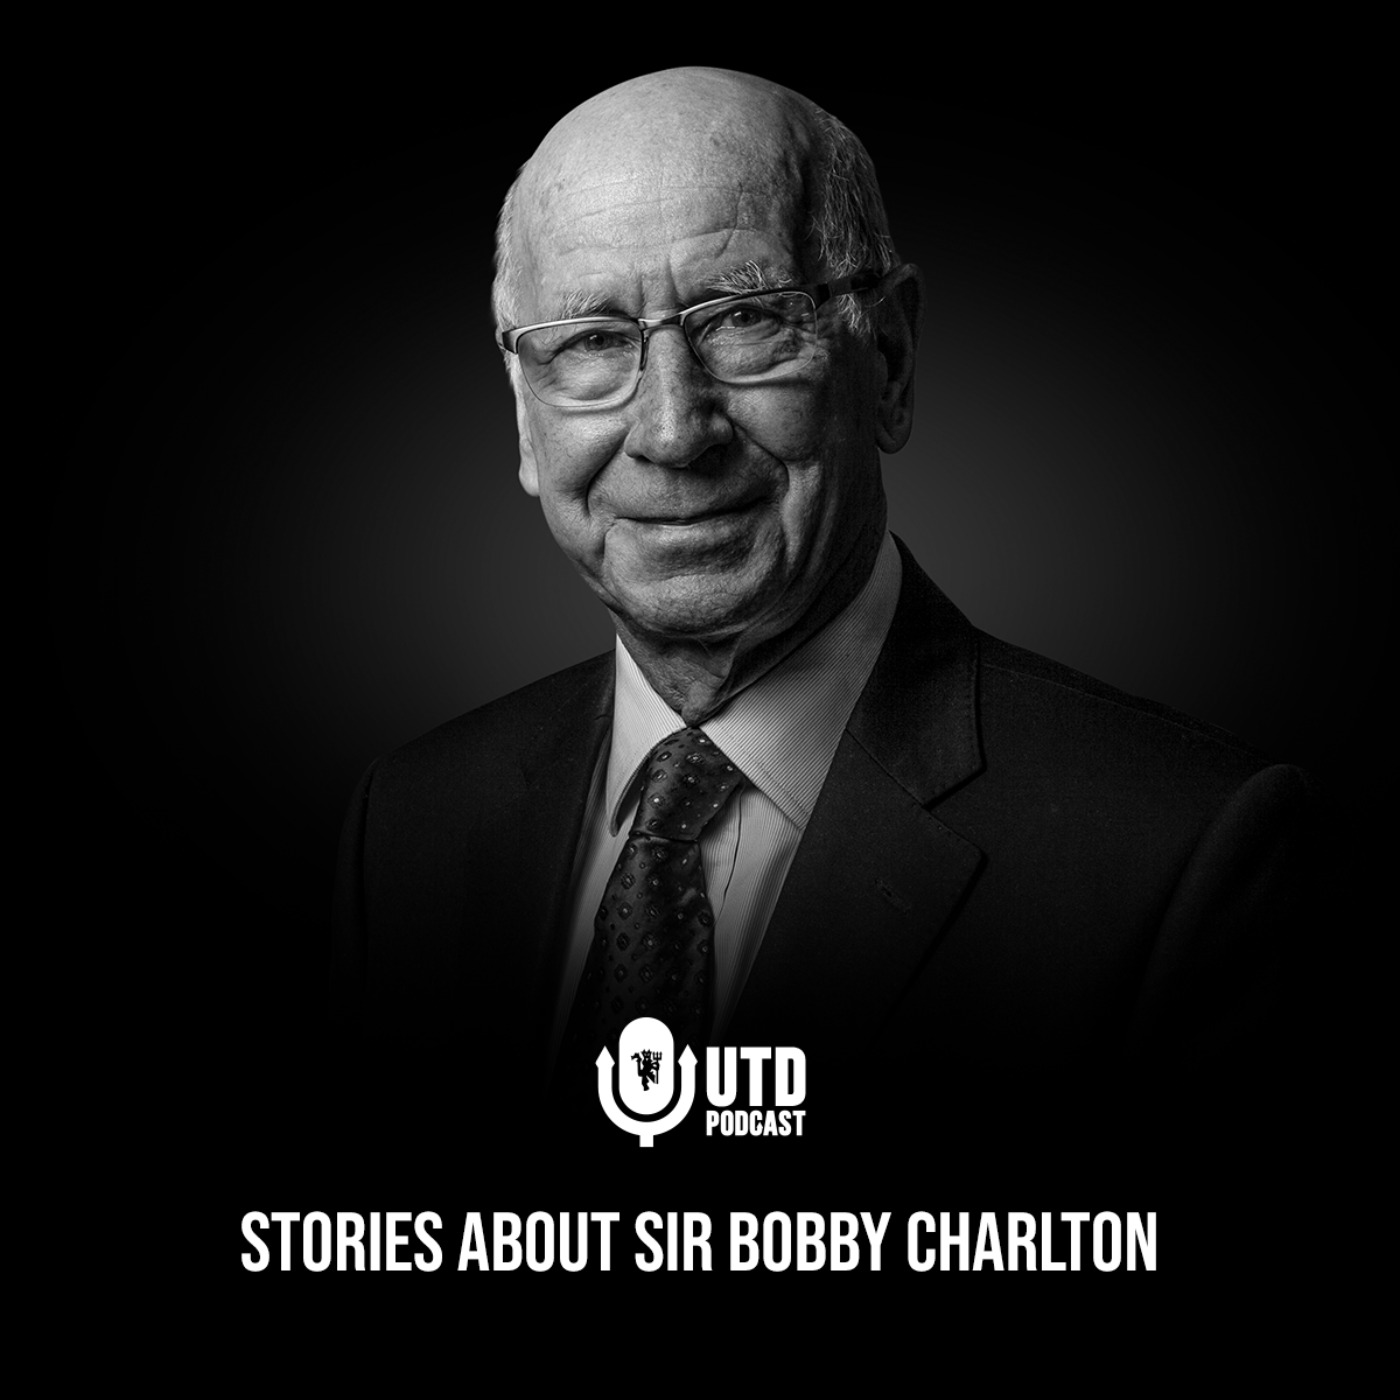 Stories about Sir Bobby Charlton